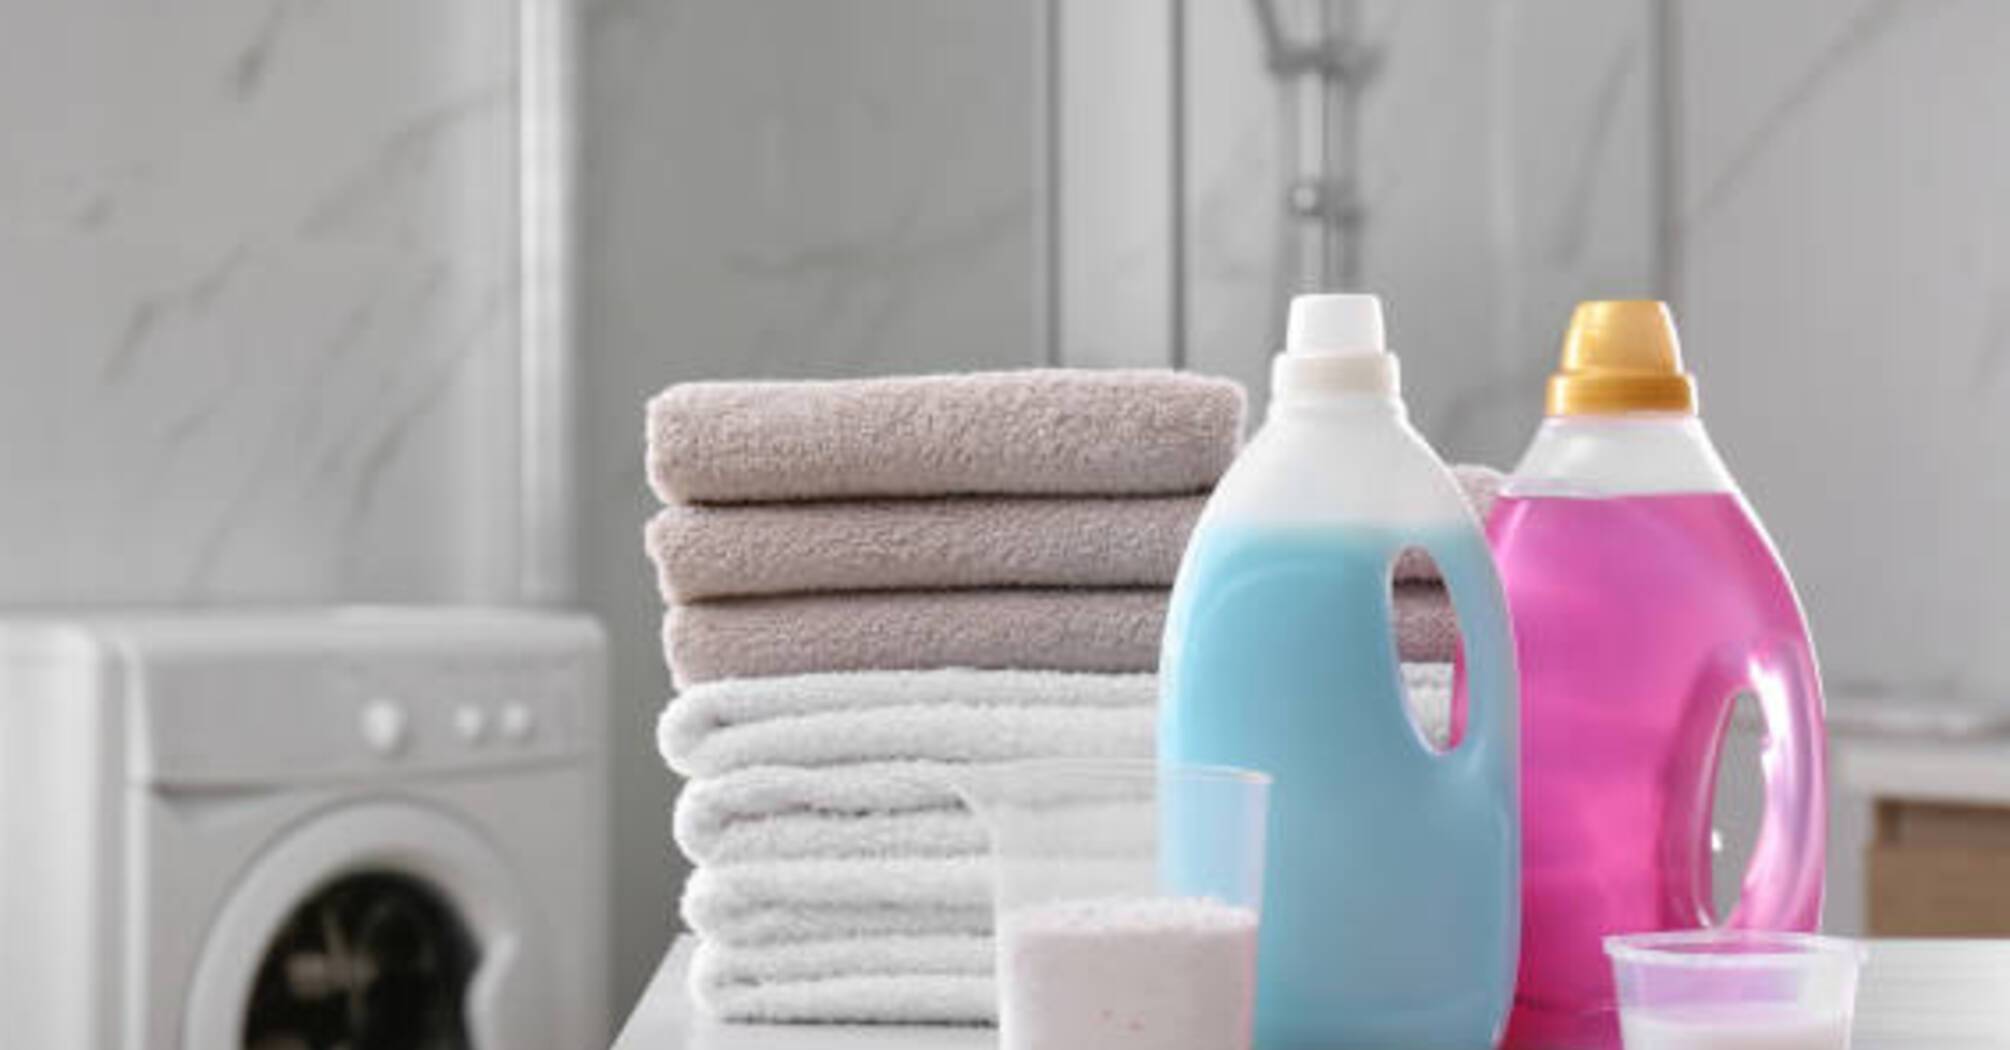 How to replace fabric softener: 3 interesting life hacks